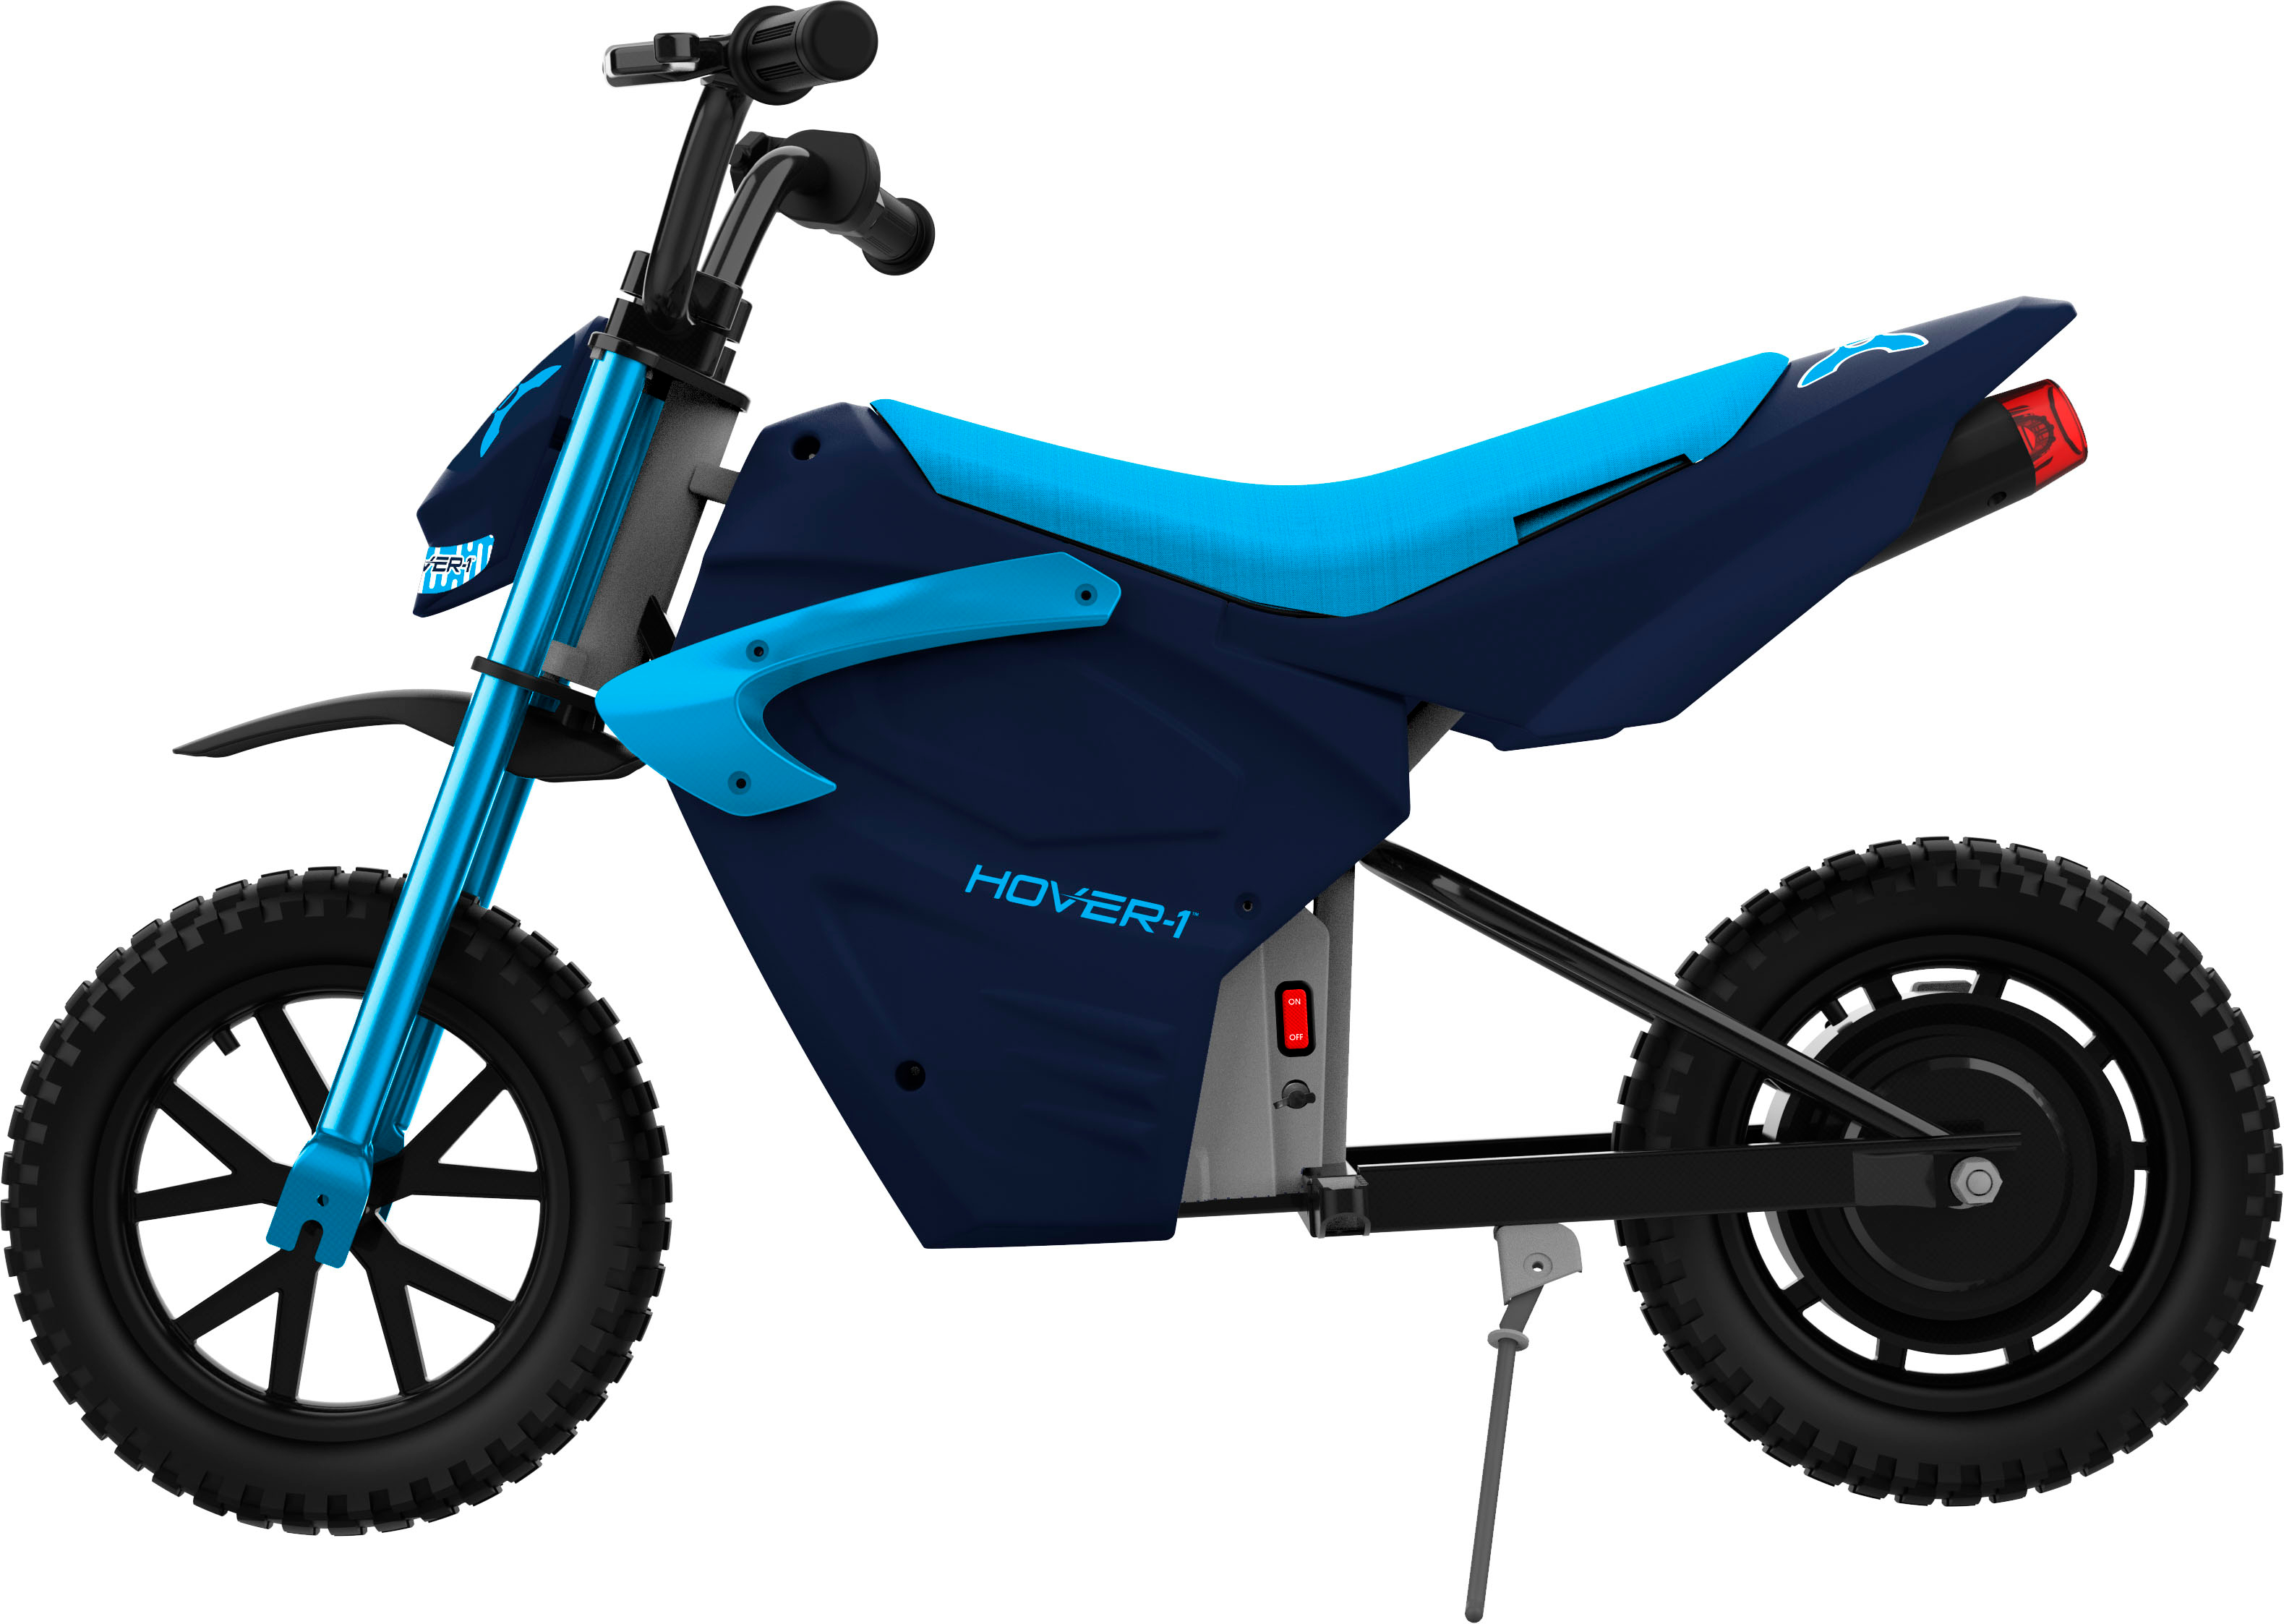 Angle View: Hover-1 - Trak Electric Dirt Bike for Kids, Silent-chainless motor, Lithium-ion Battery, 9 mi Range, 9 mph Max Speed - Blue